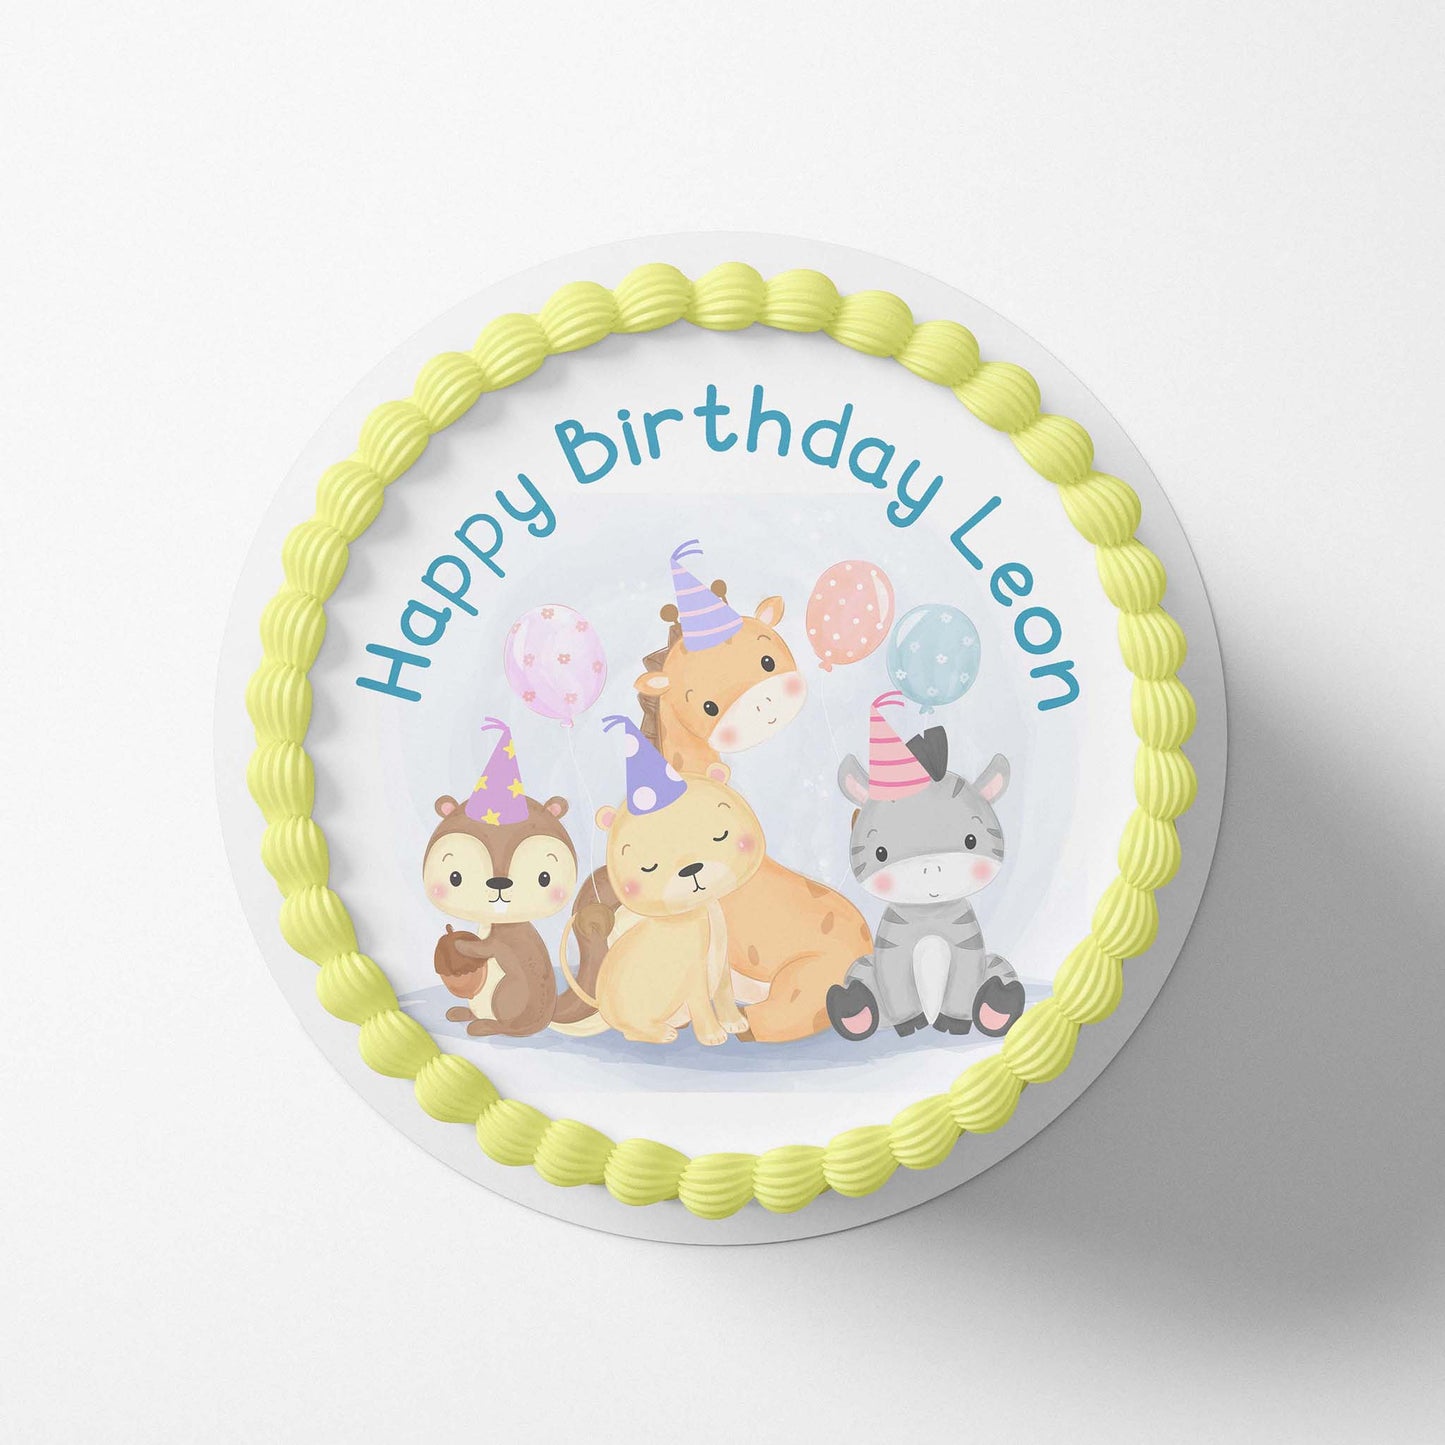 Cute Animals With Party Hats - Custom Edible Image toppers Edible Cake Topper, Edible Cake Image, Pre-designed edible icing image,printsoncakes